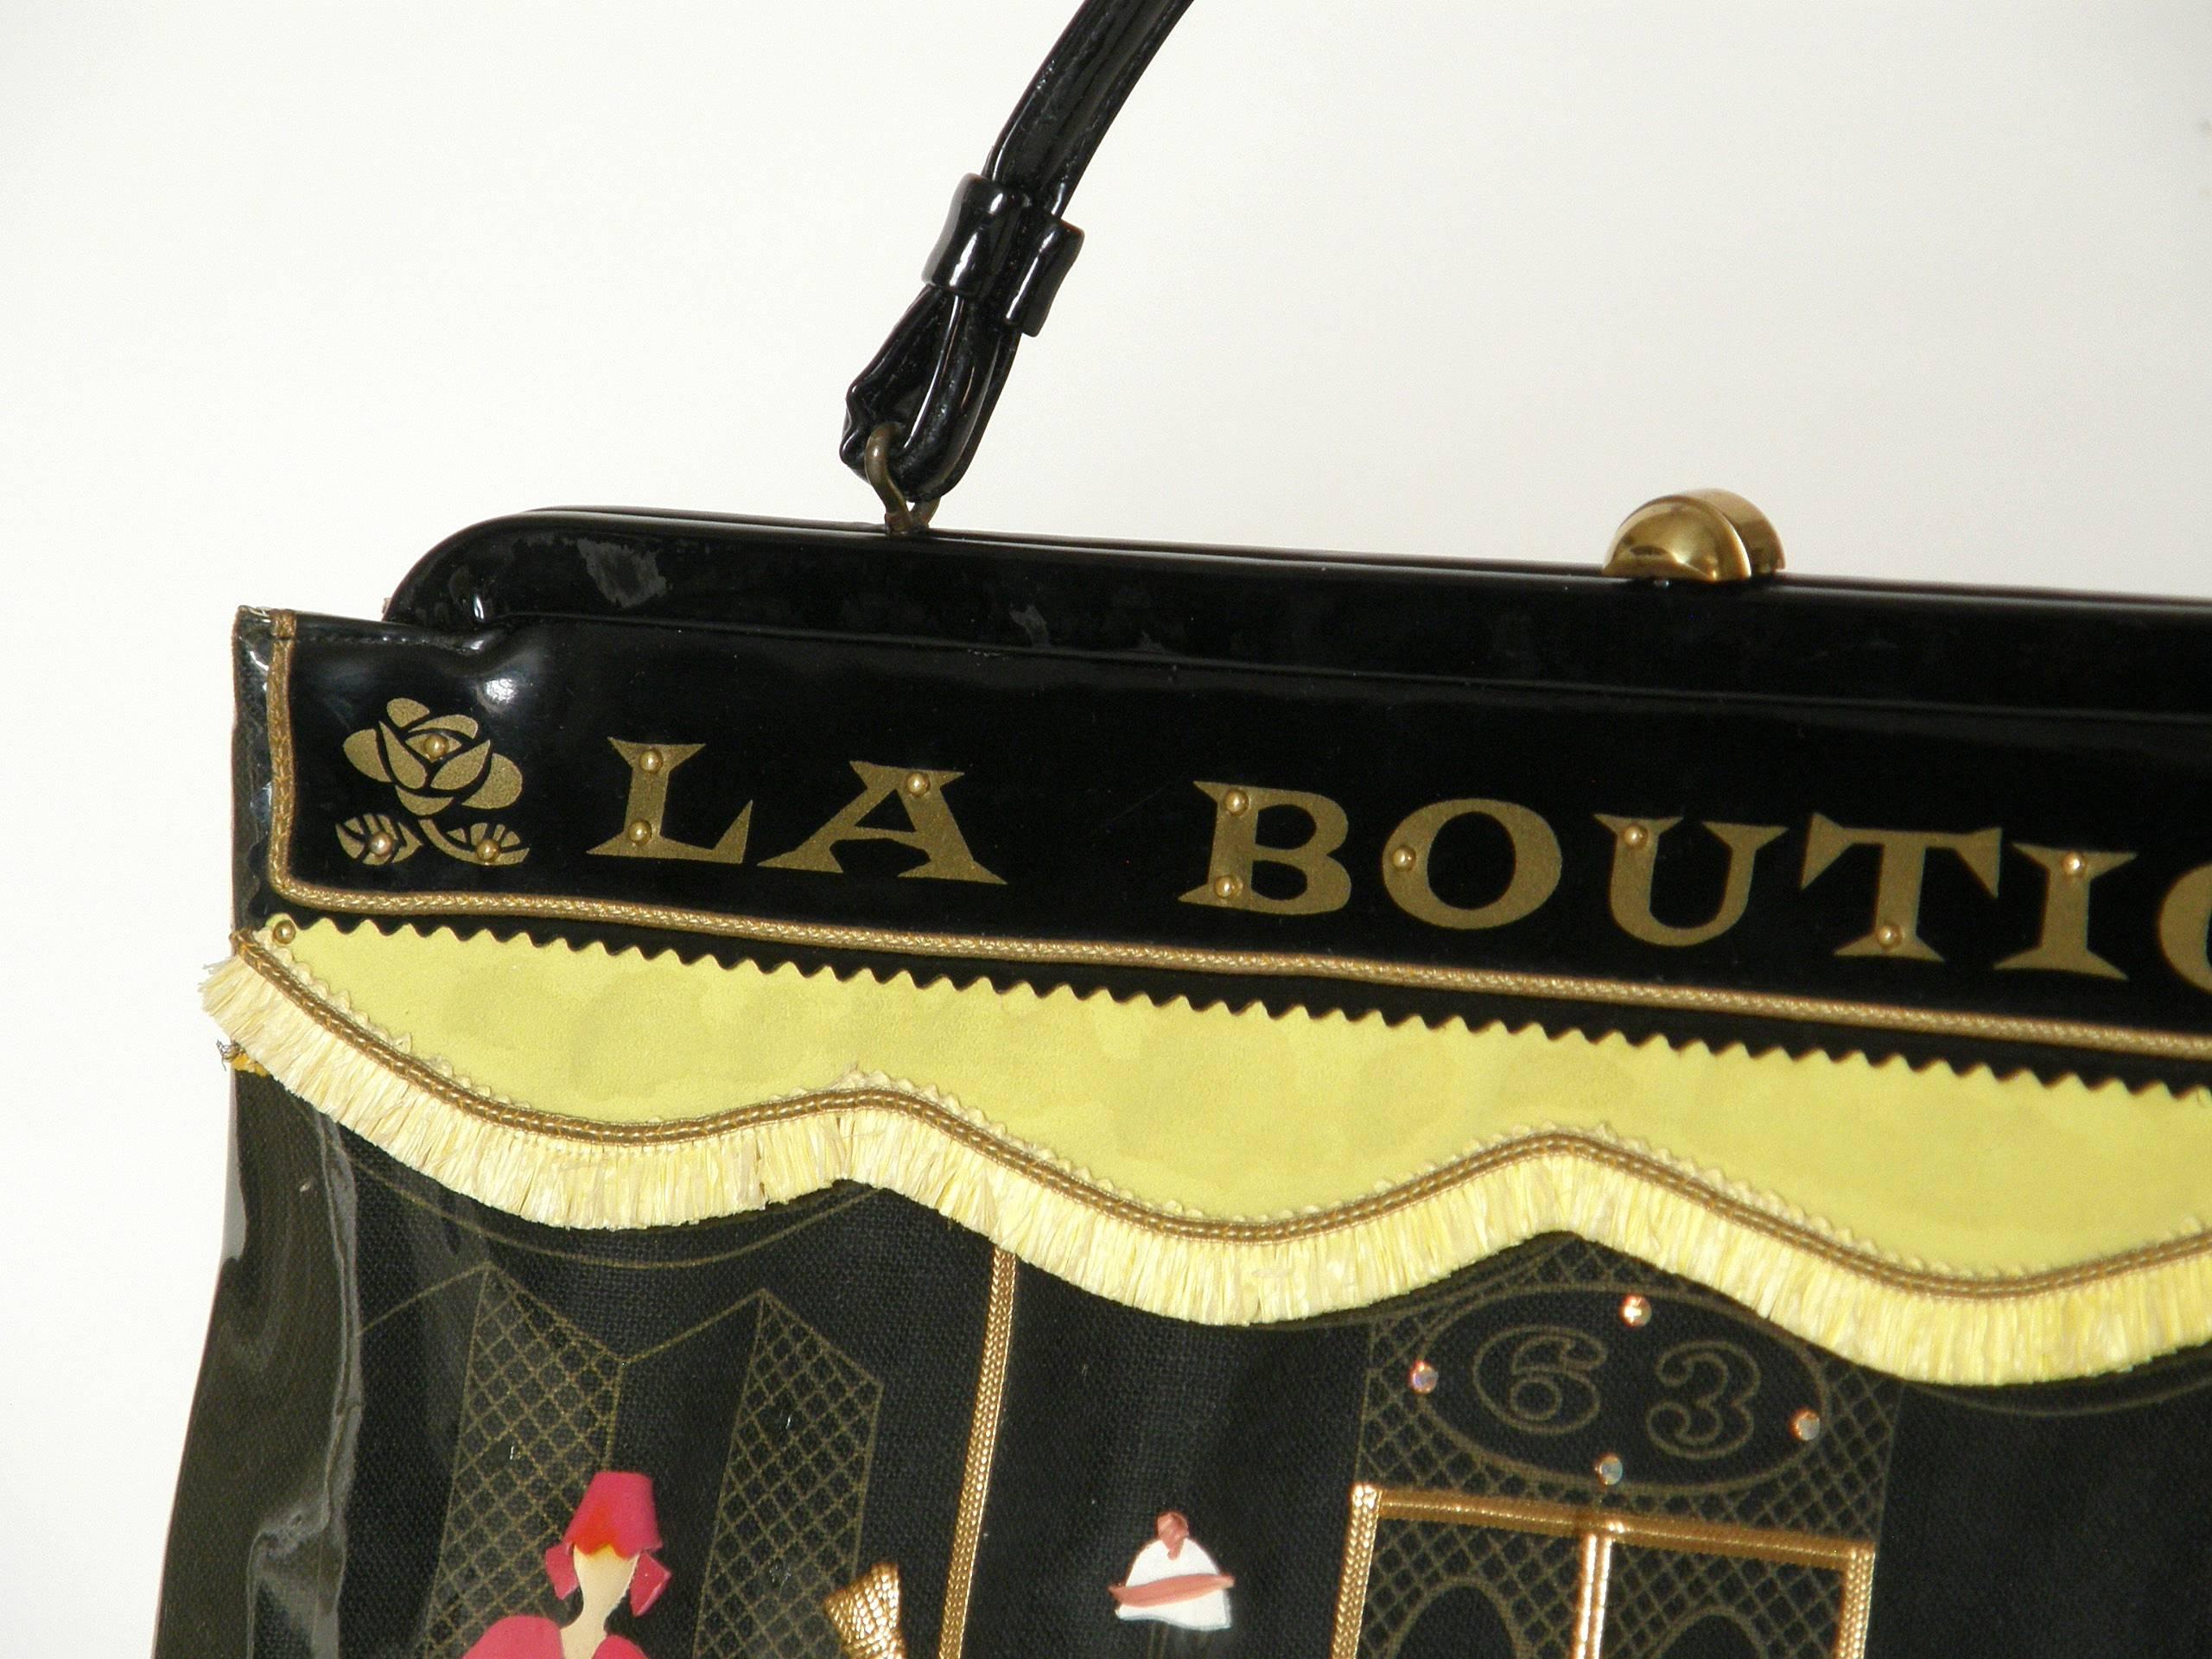 This stylish, novelty purse by Soure' is designed to look like a French clothing shop. The front of the bag has a screen printed image of a storefront with mannequins, clothing and accessories in the display windows that flank the front door. The